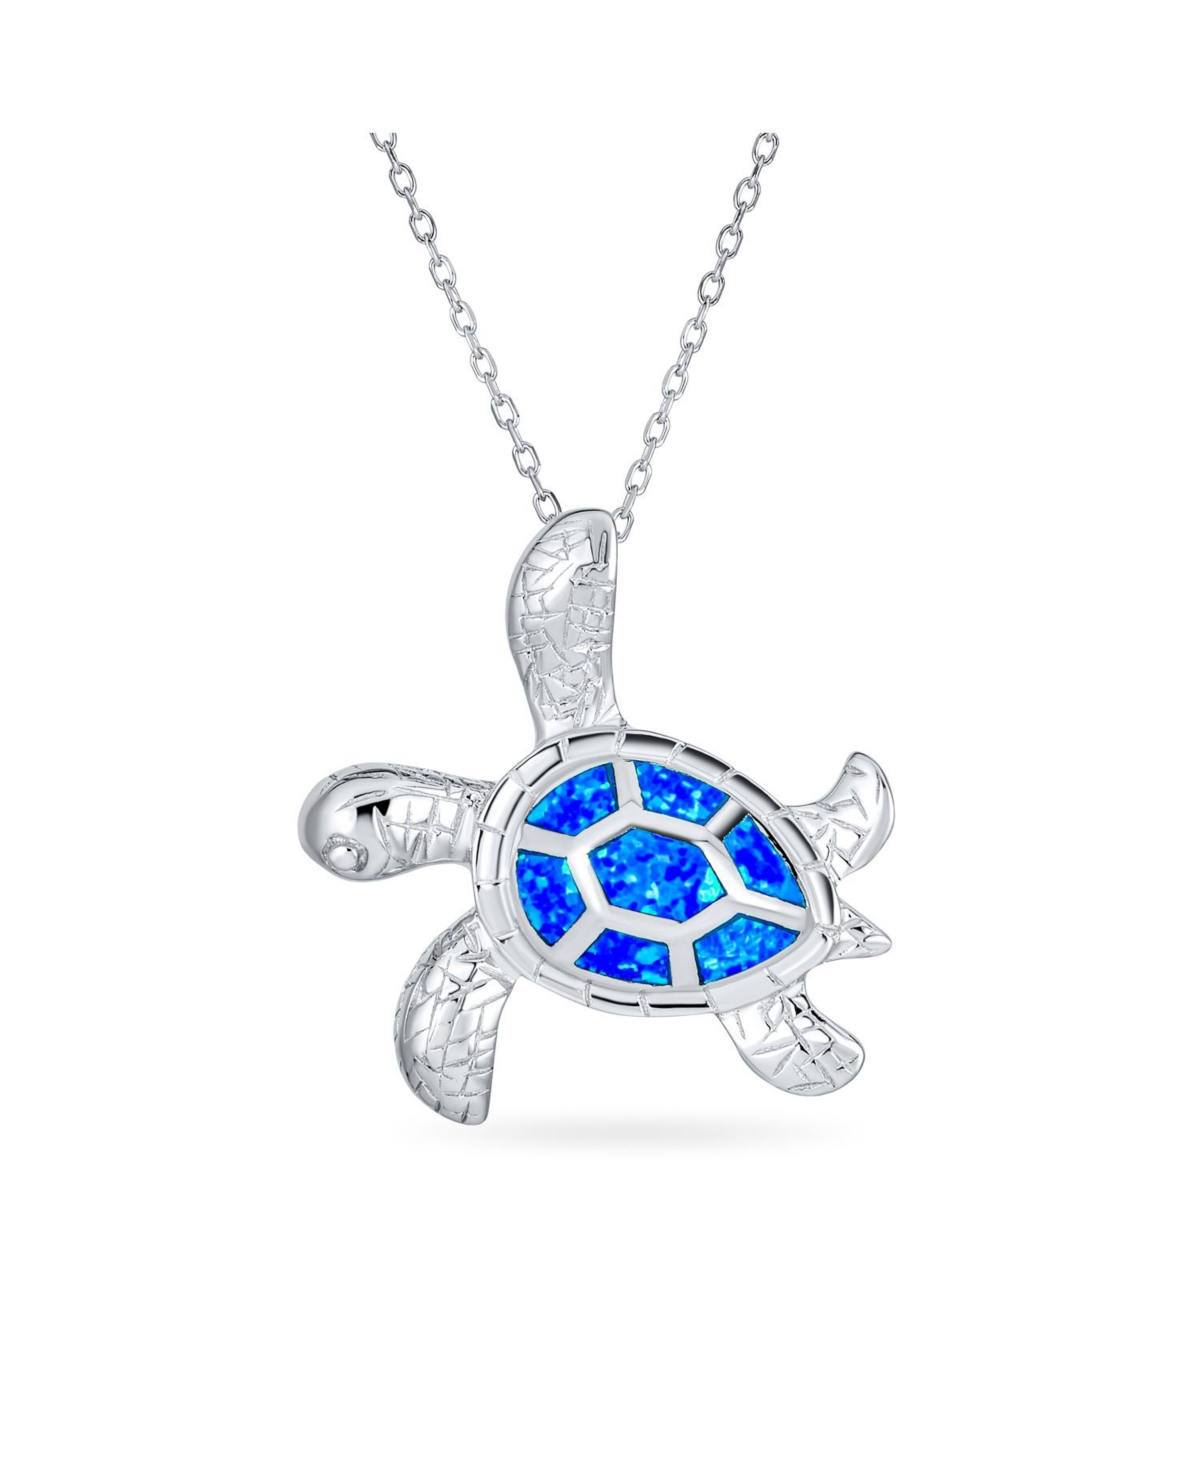 Large Nautical Tropical Beach Vacation Iridescent Blue Created Opal Inlay Sea Tortoise Turtle Pendant Necklace For Women Teen .925 Sterl